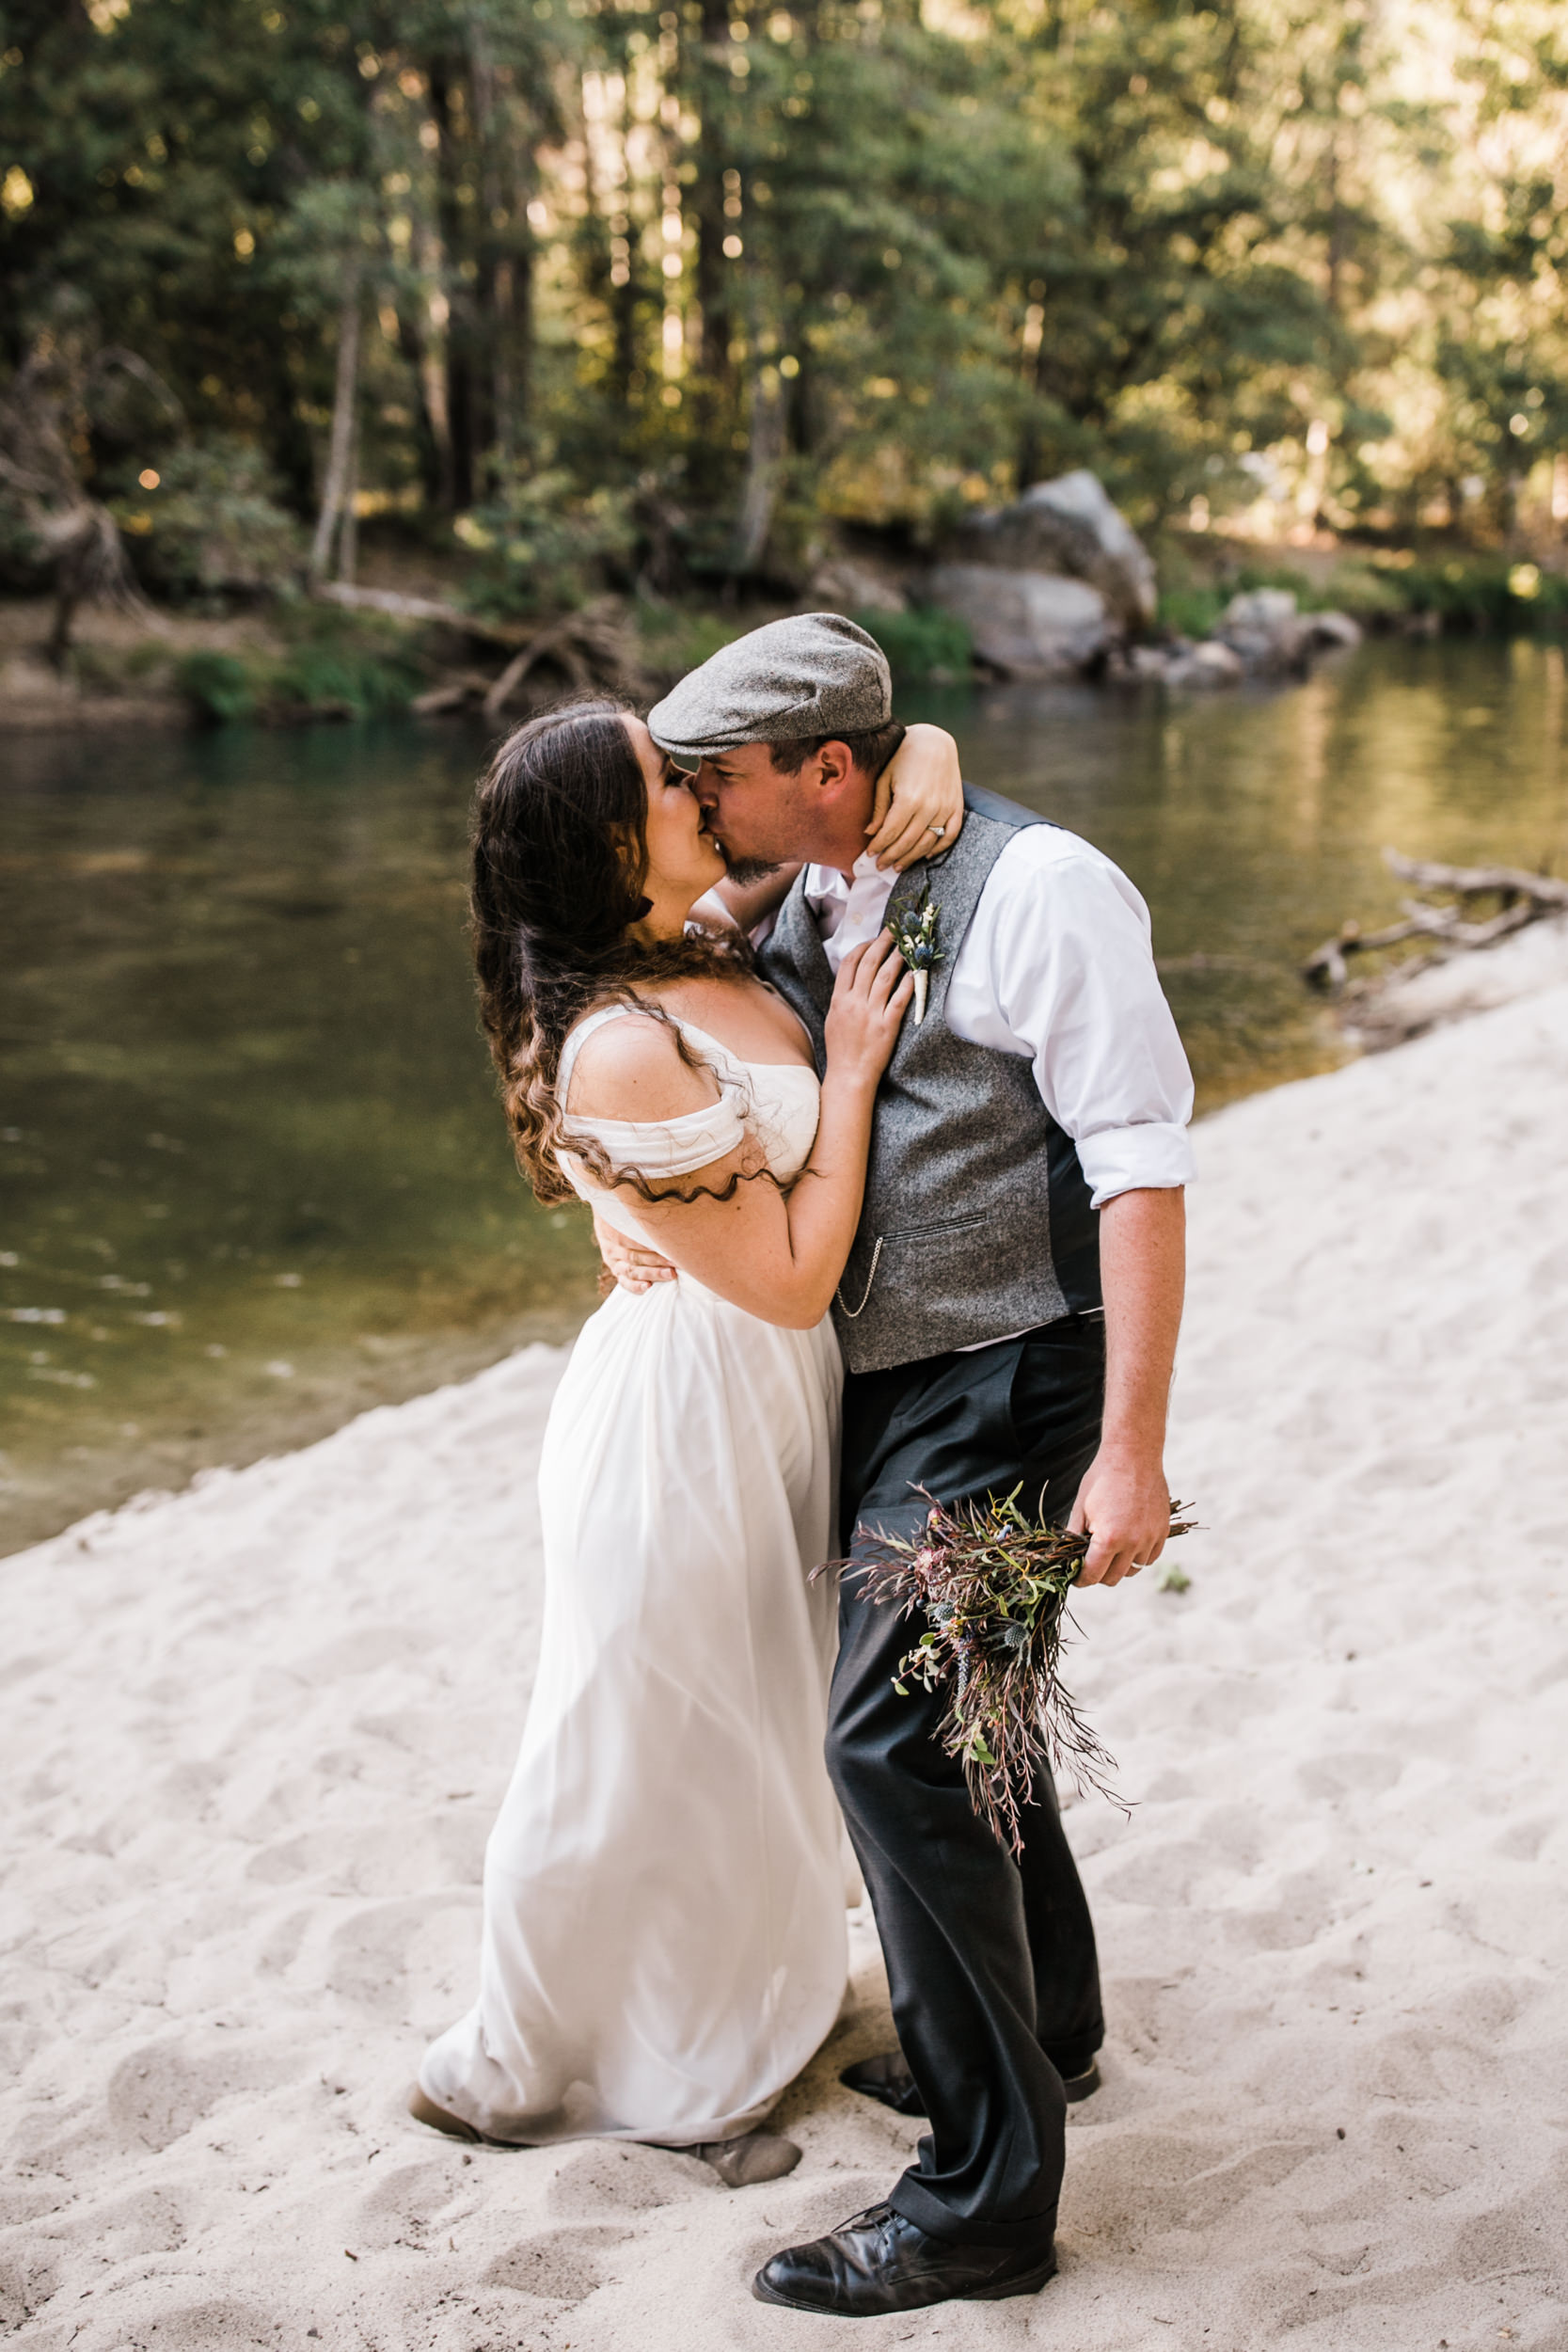 morgan + trevor’s intimate wedding in yosemite national park | private vows at sunrise + wedding ceremony at Glacier Point | groom wearing a kilt | adventure elopement photographer